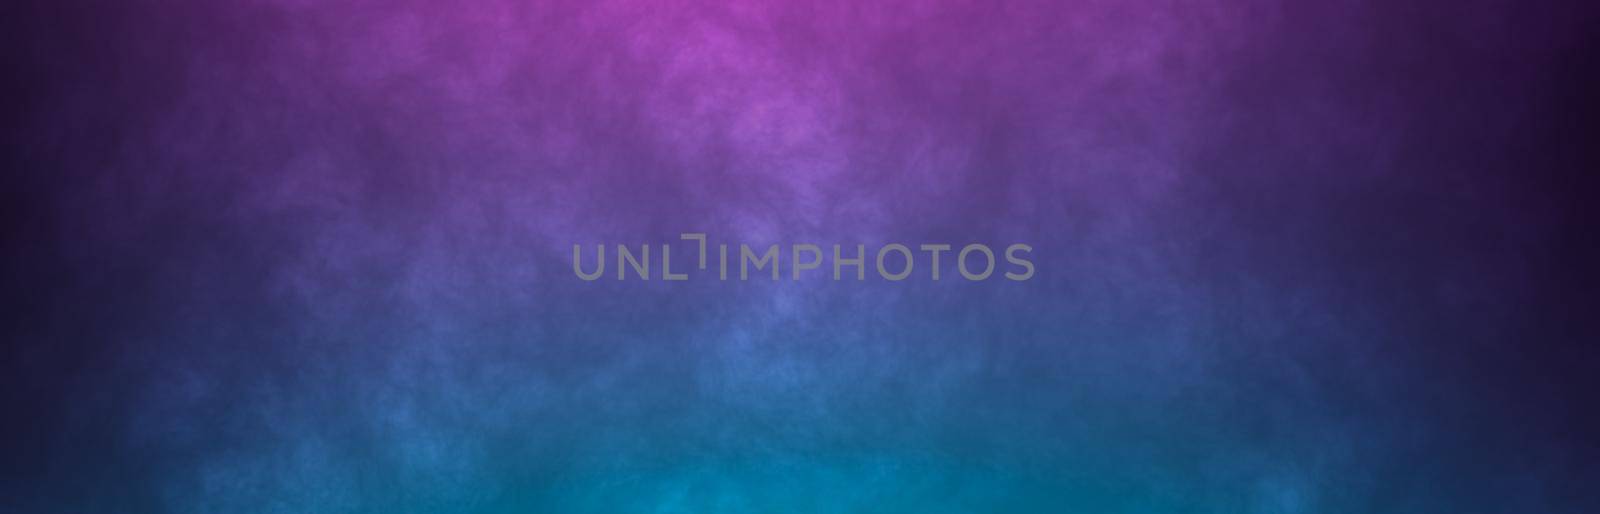 Abstract foggy horizonta background. Neon colors pink and blue light smoke